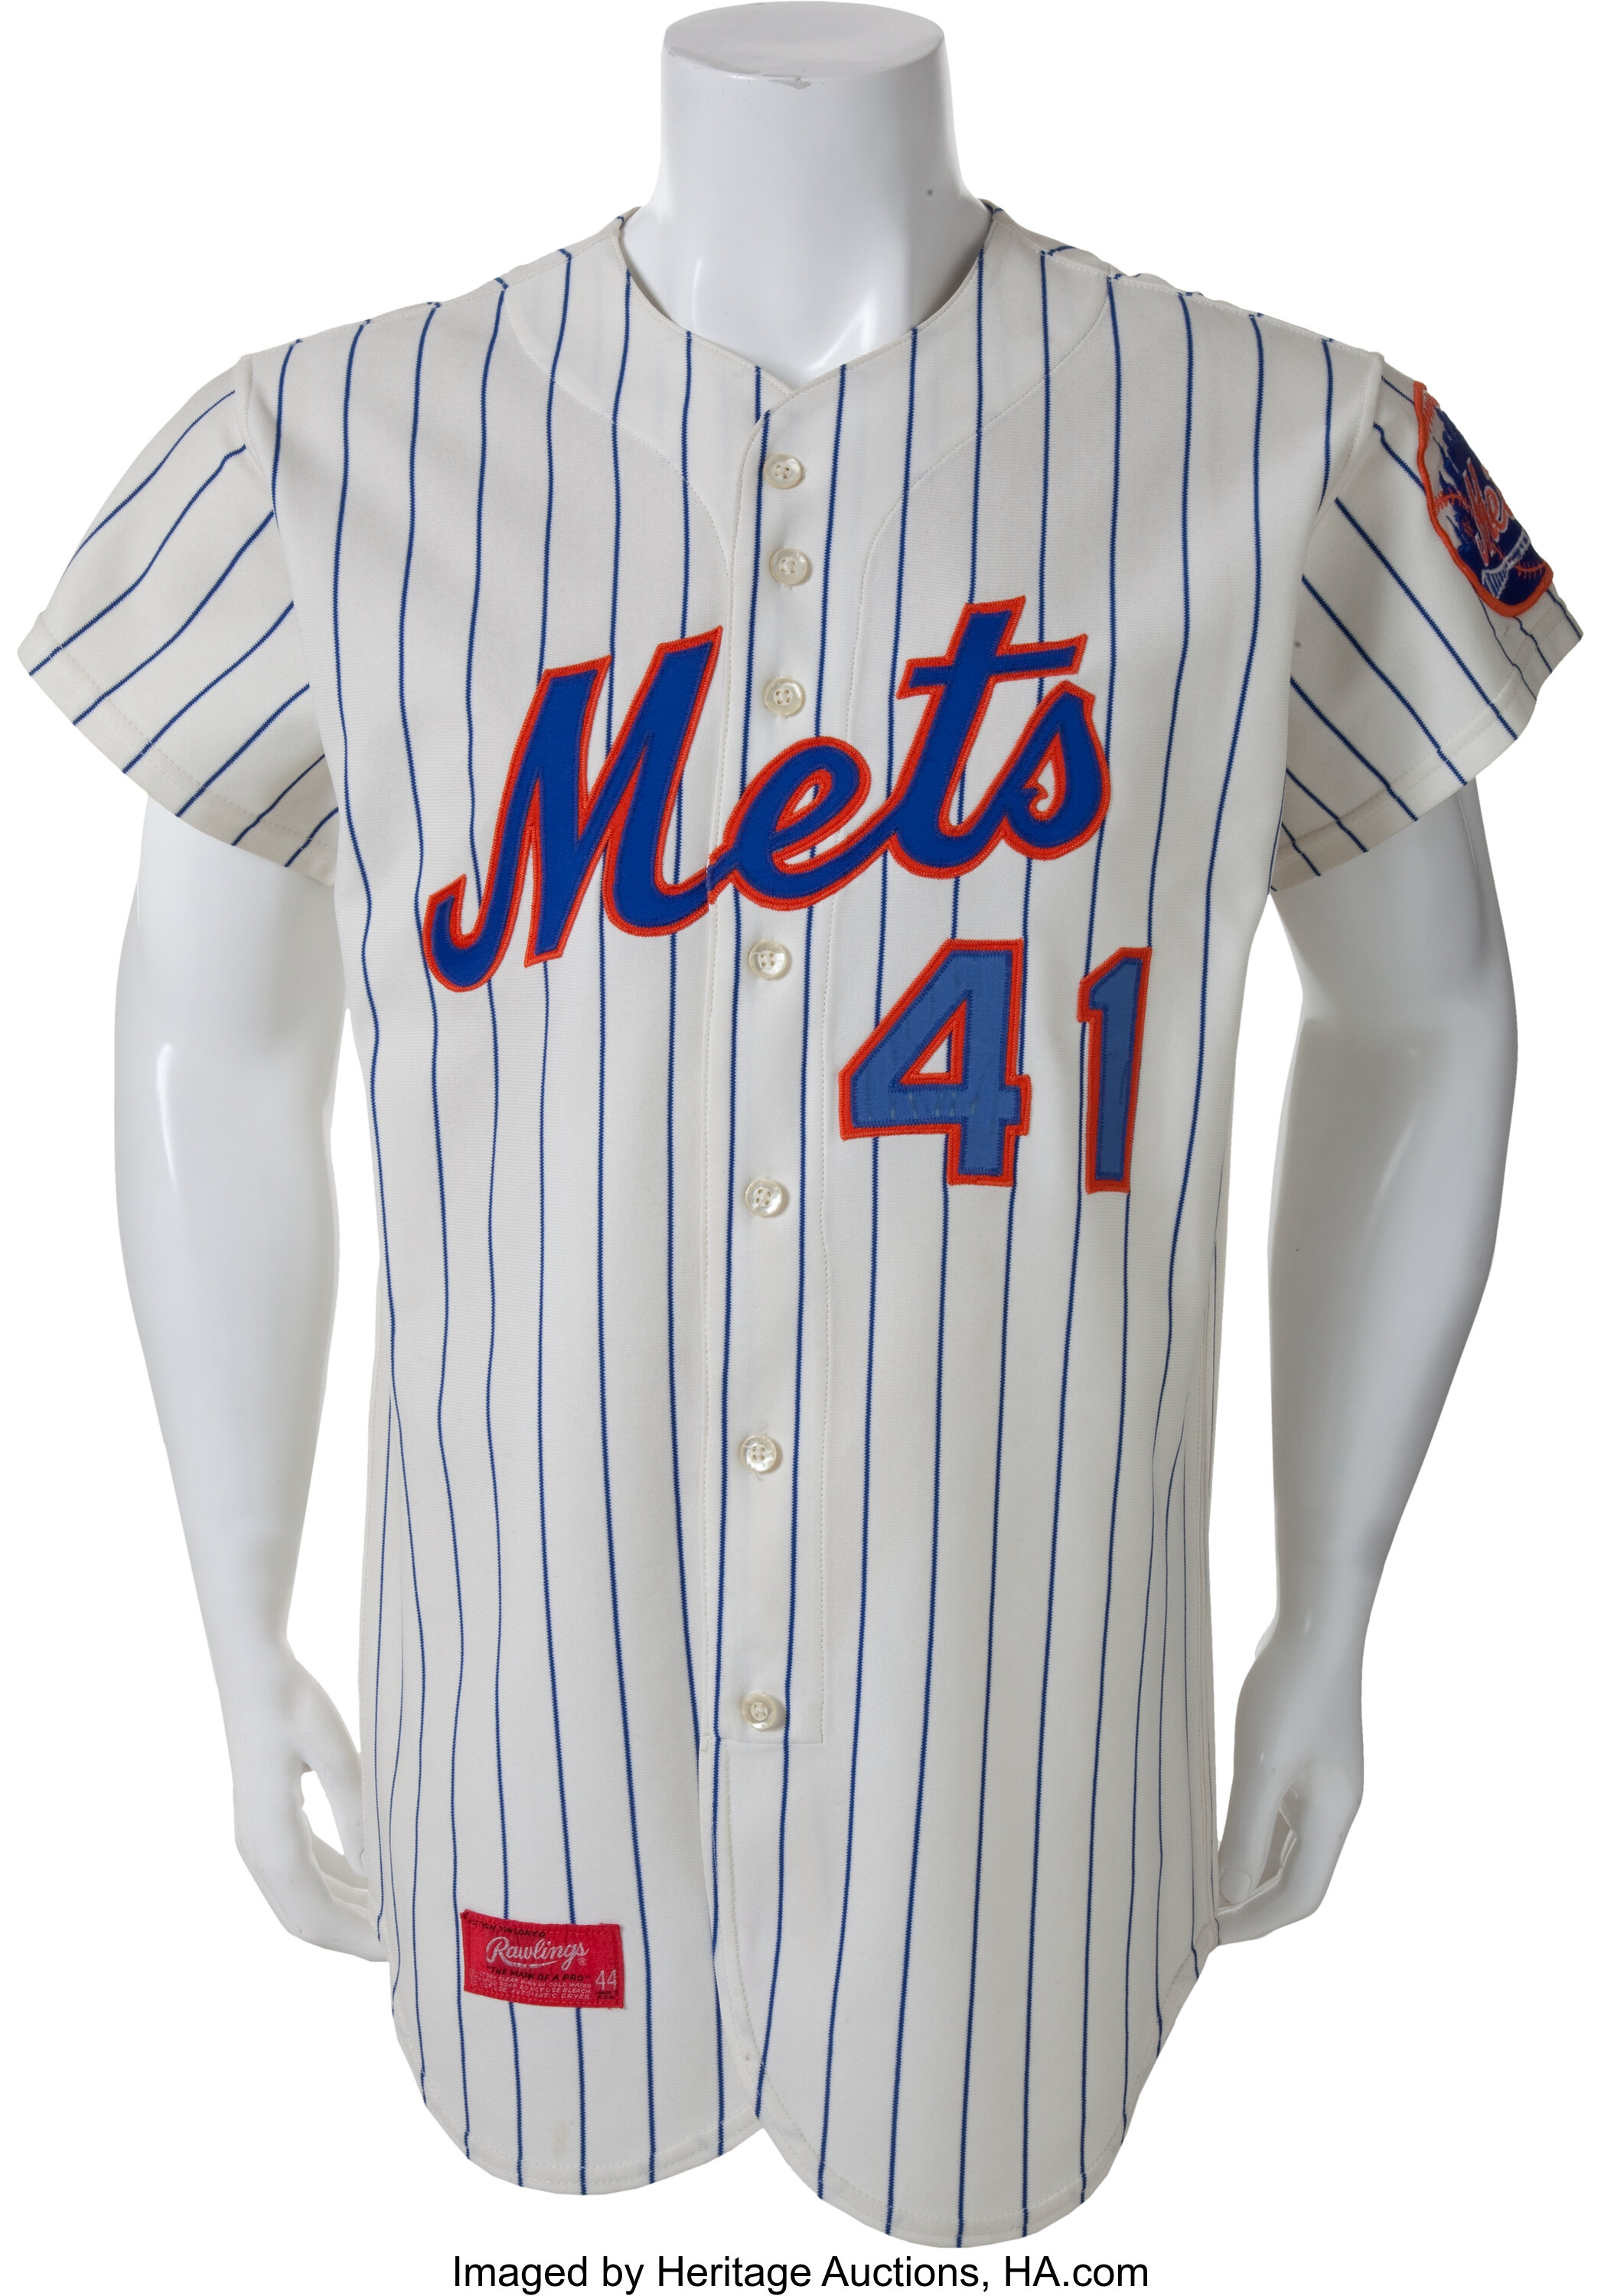 1973 Tom Seaver Game Worn New York Mets Jersey from Cy Young, Lot #81546